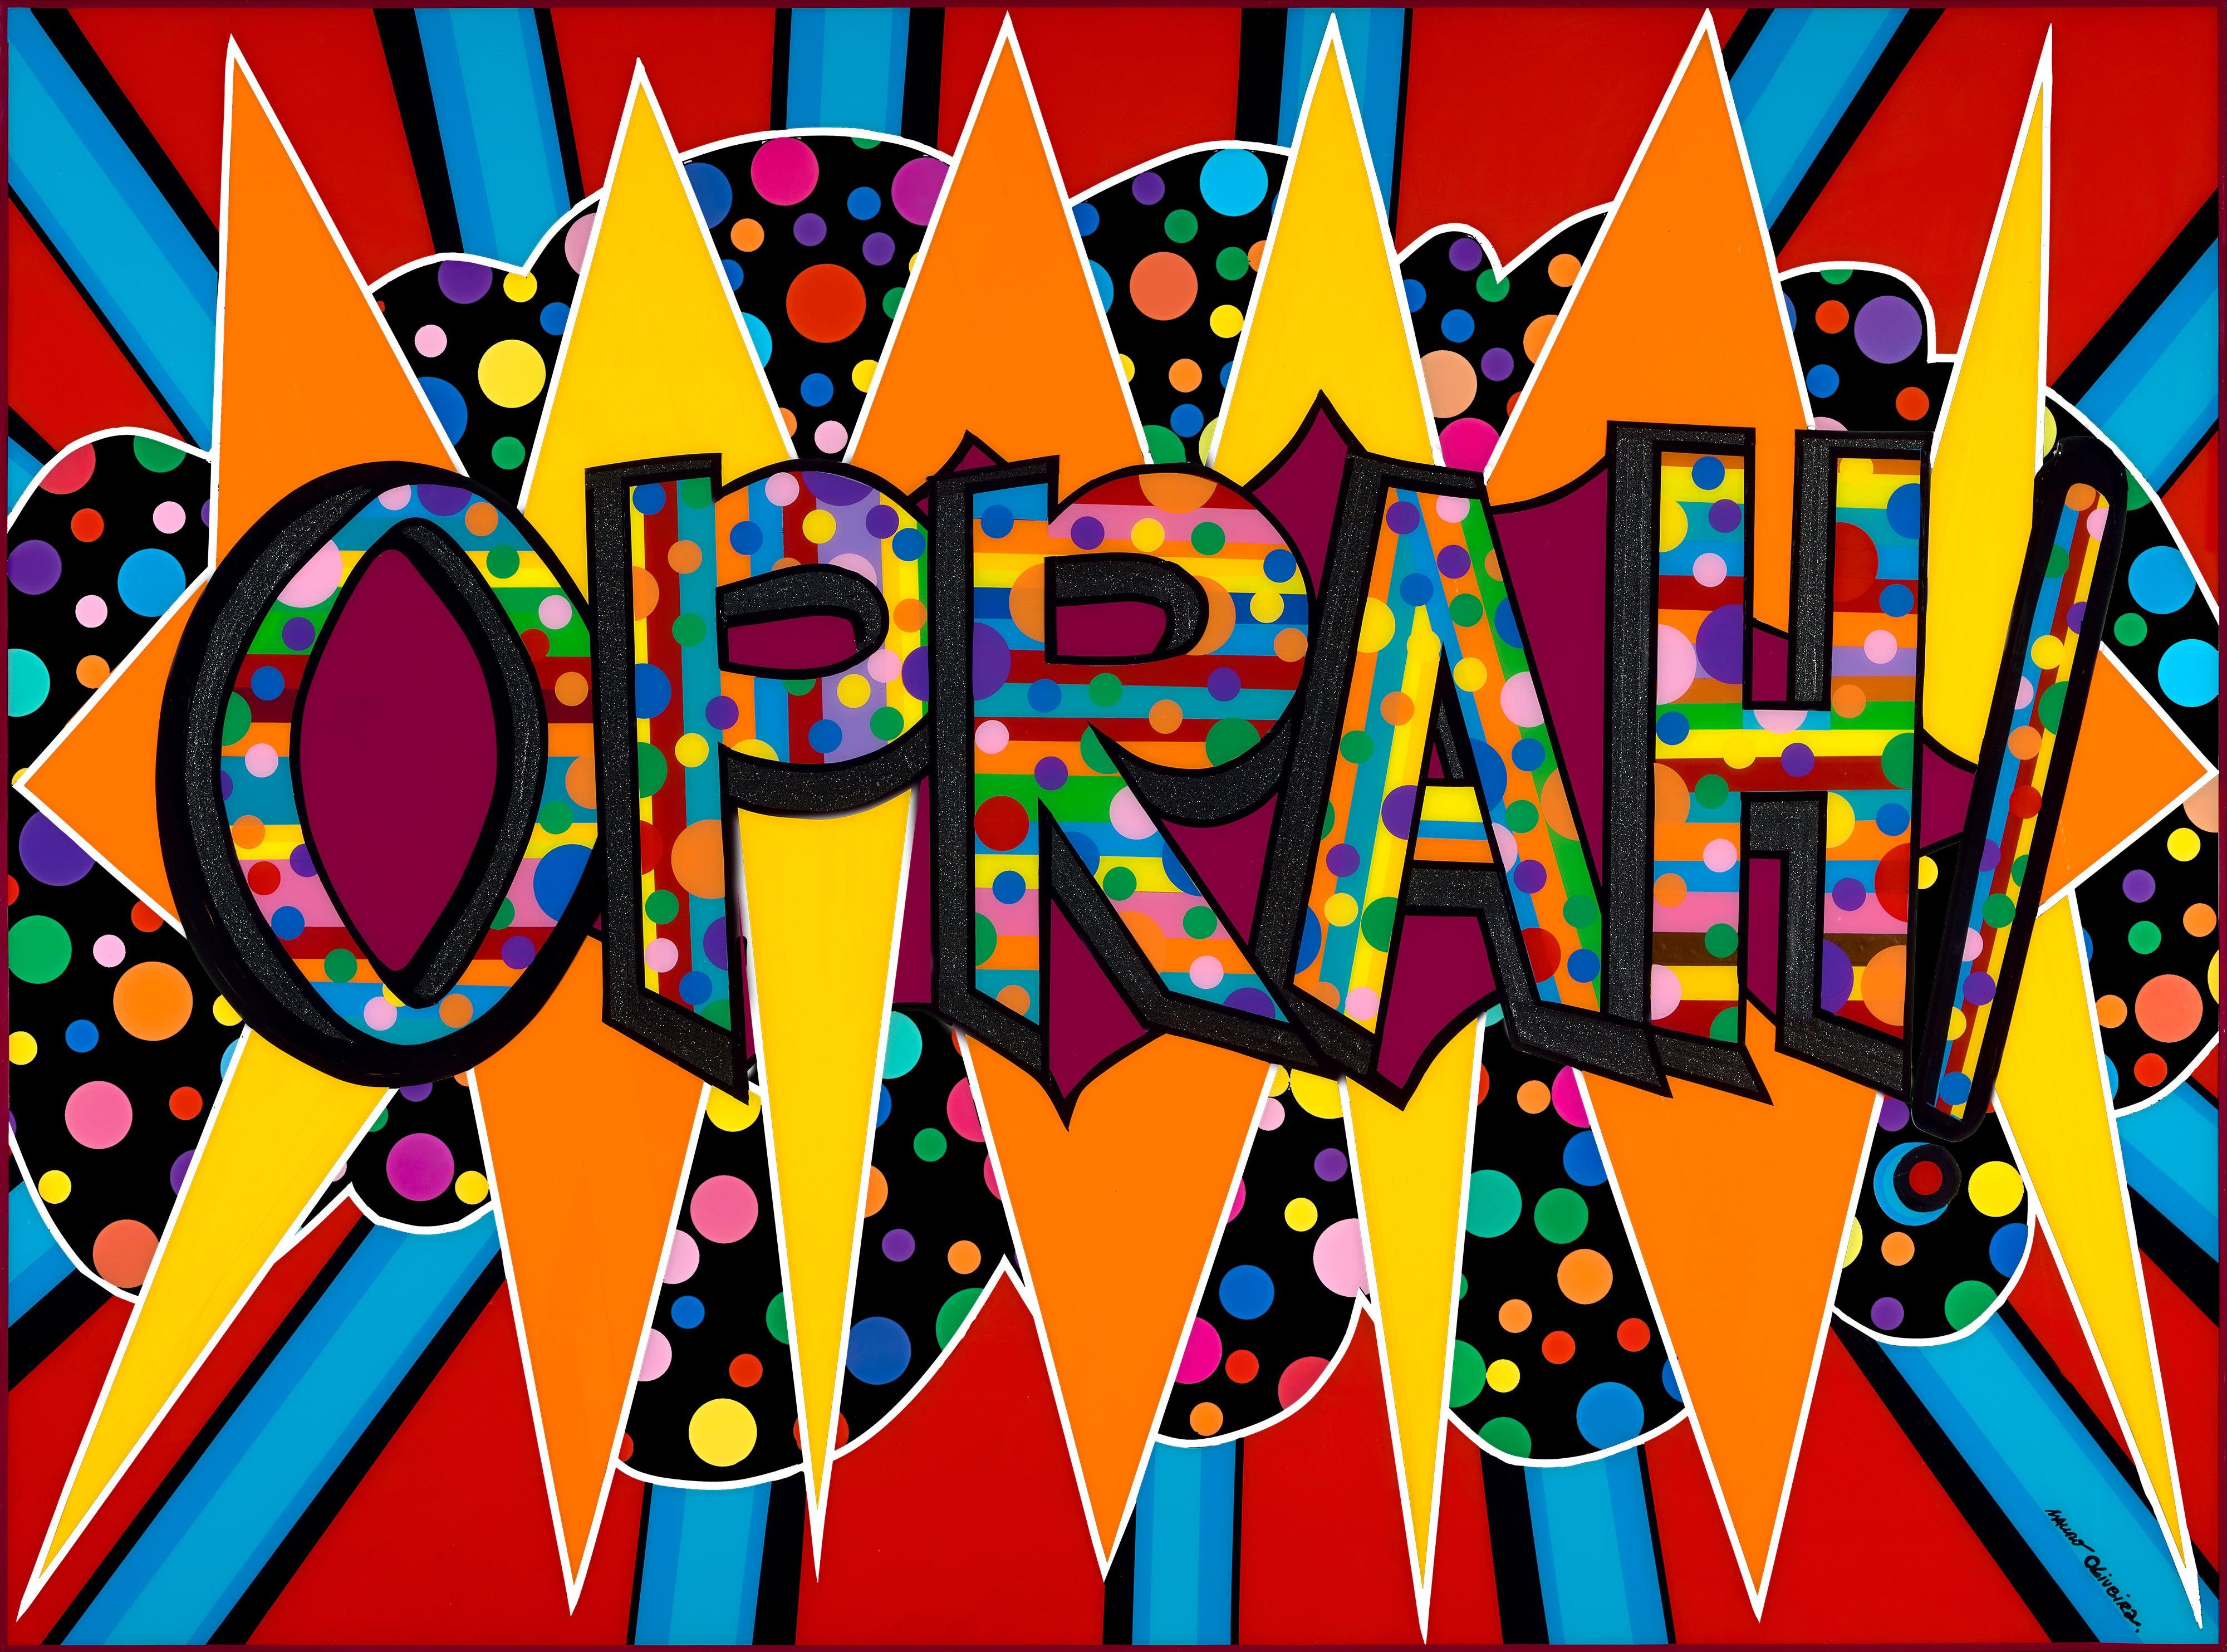 **ANNUAL SUPER SALE UNTIL MAY 15TH ONLY**
THIS PRICE WON'T BE REPEATED AGAIN THIS YEAR - TAKE ADVANTAGE OF IT**

Celebrating Oprah with this unique piece by Mauro Oliveira. The colorful approach represents all the people Oprah has touched positively